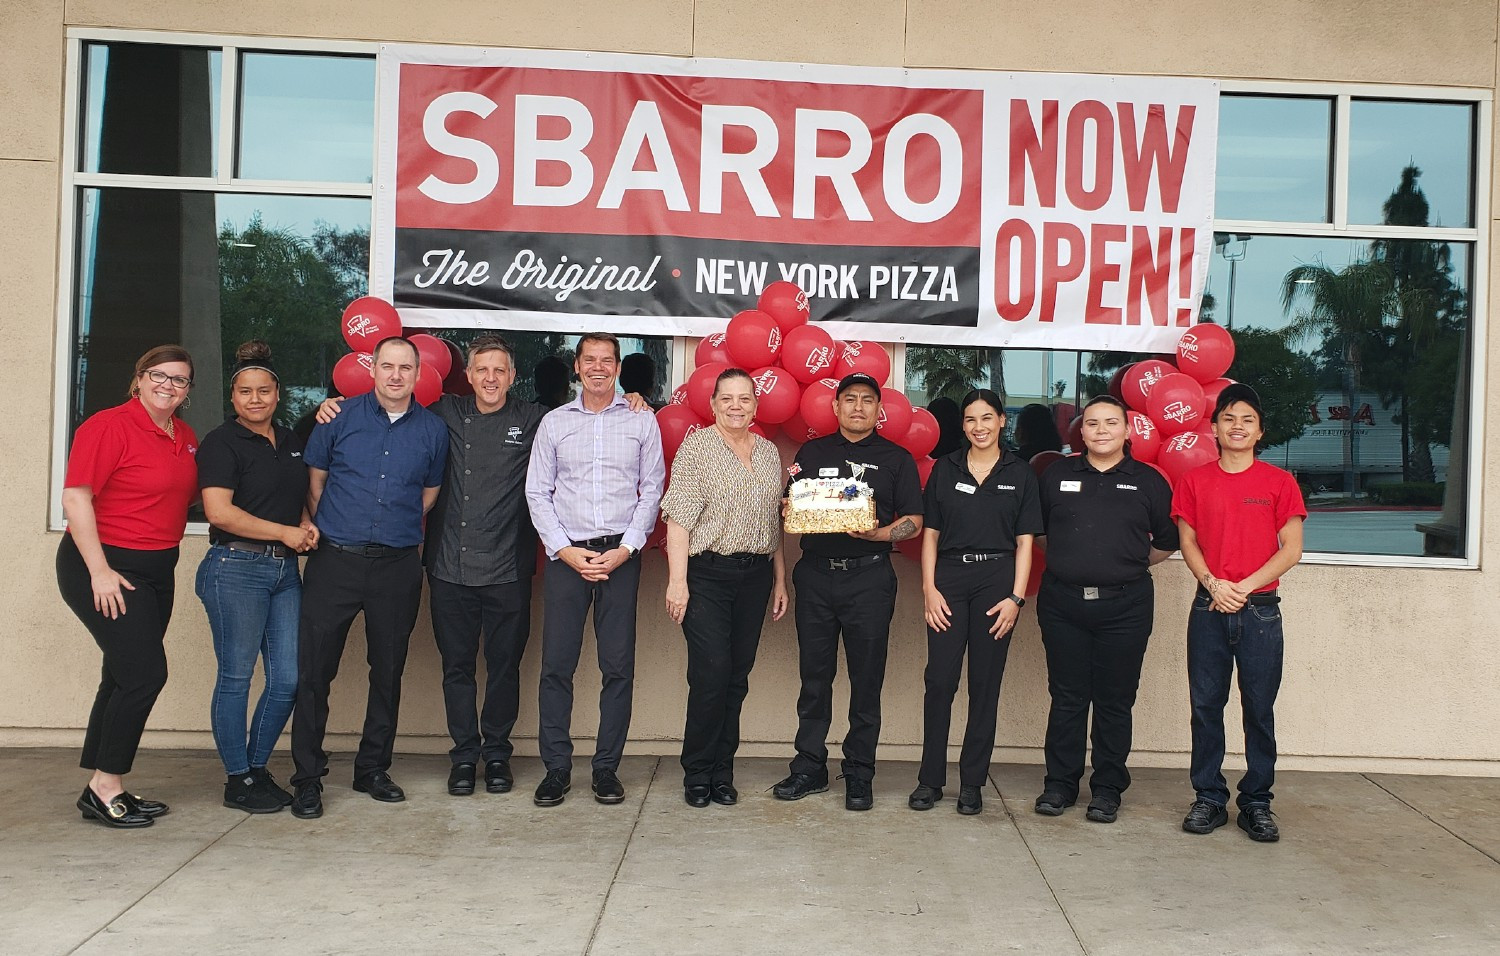 Restaurant team at one of the nearly 300 restaurants Sbarro has opened worldwide over the last 3 years.